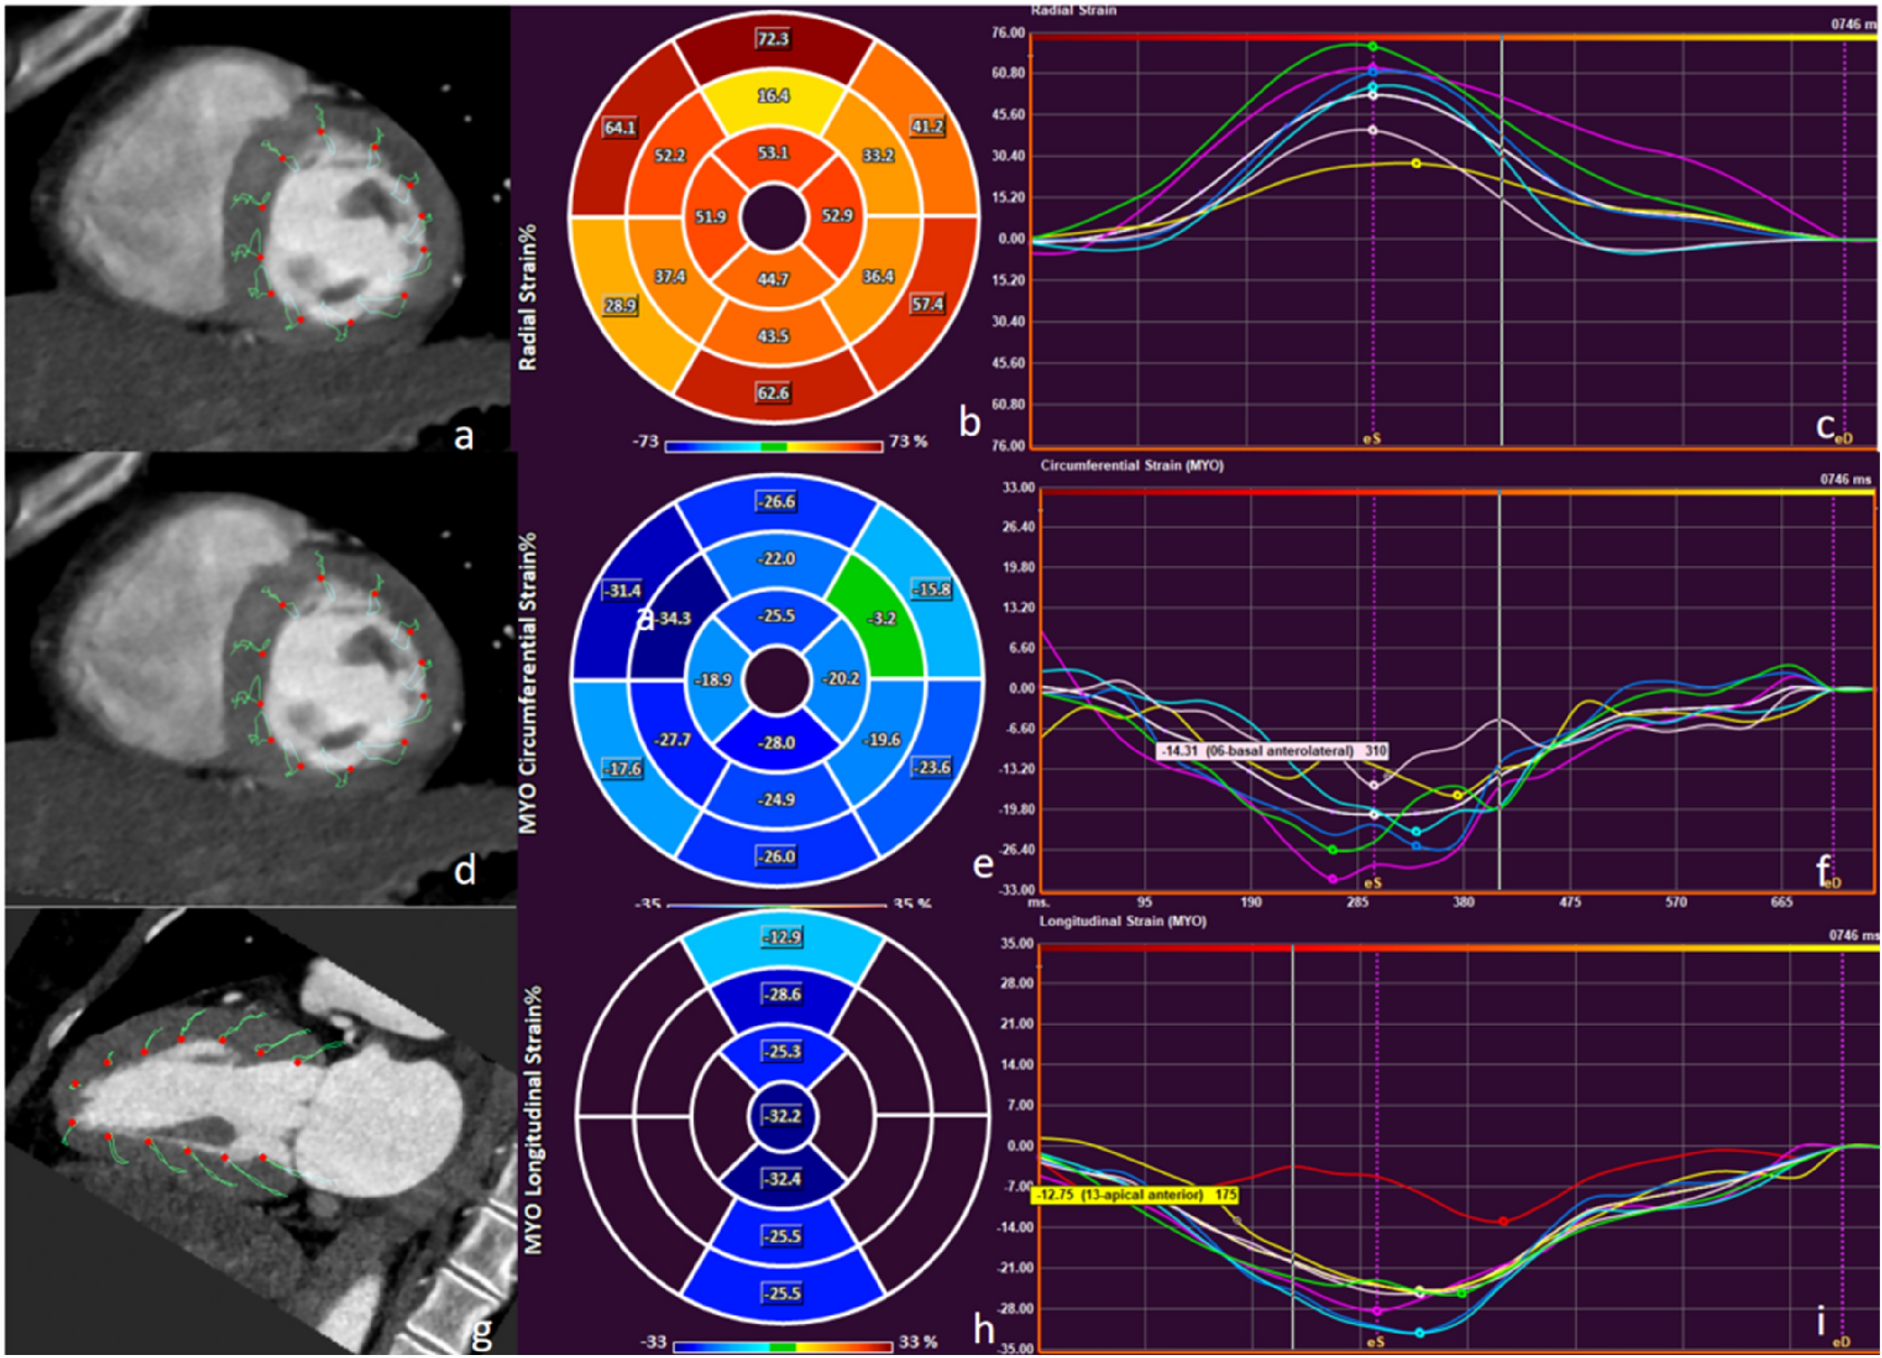 Myocardial strain to detect subtle left ventricular systolic